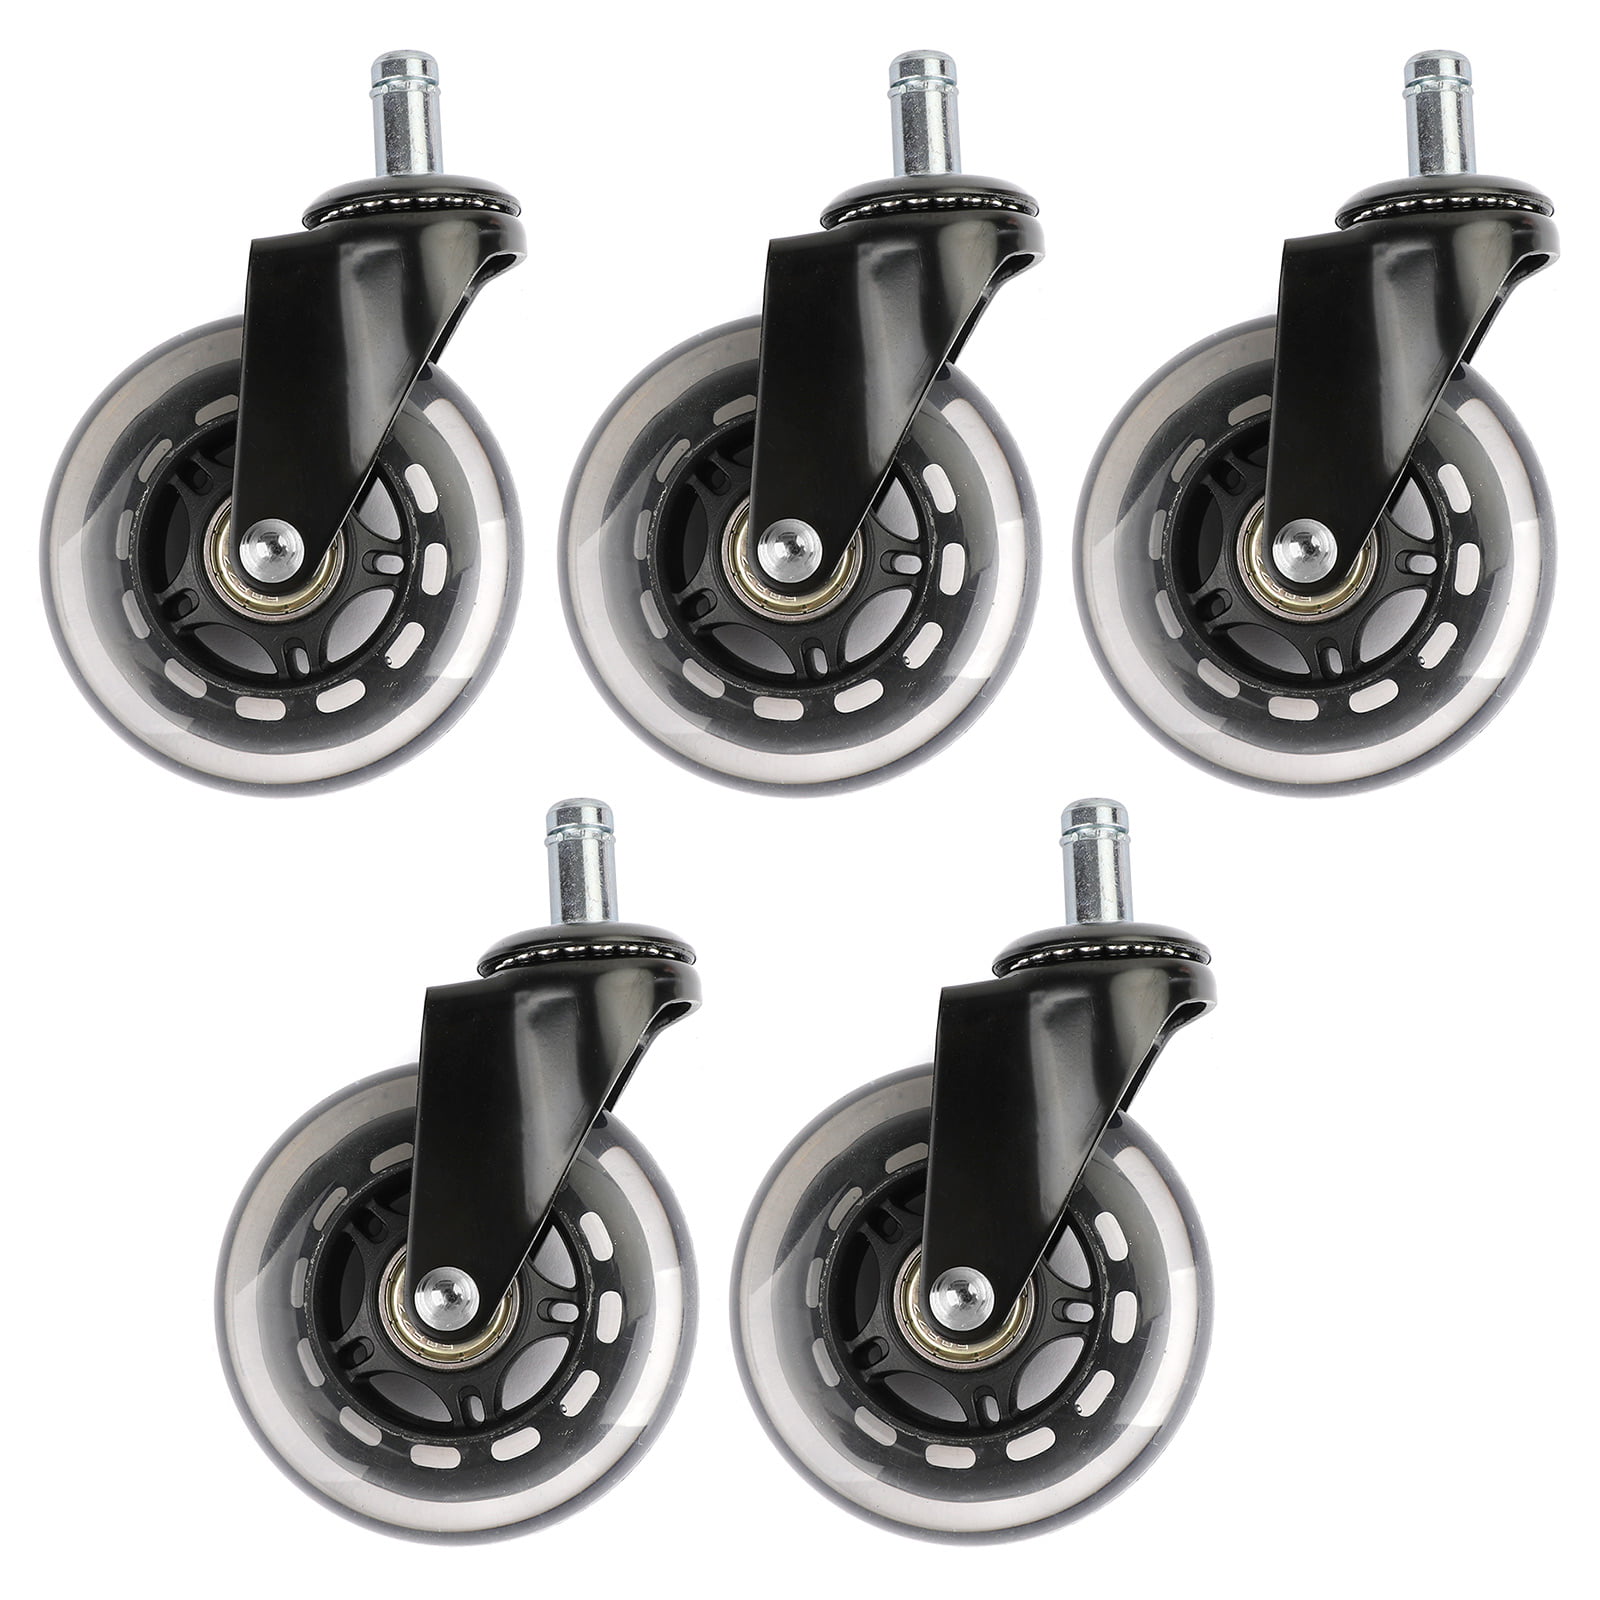 Set of 4 Office Chair Caster Rubber Swivel Wheels Replacement Heavy Duty 3 inch 